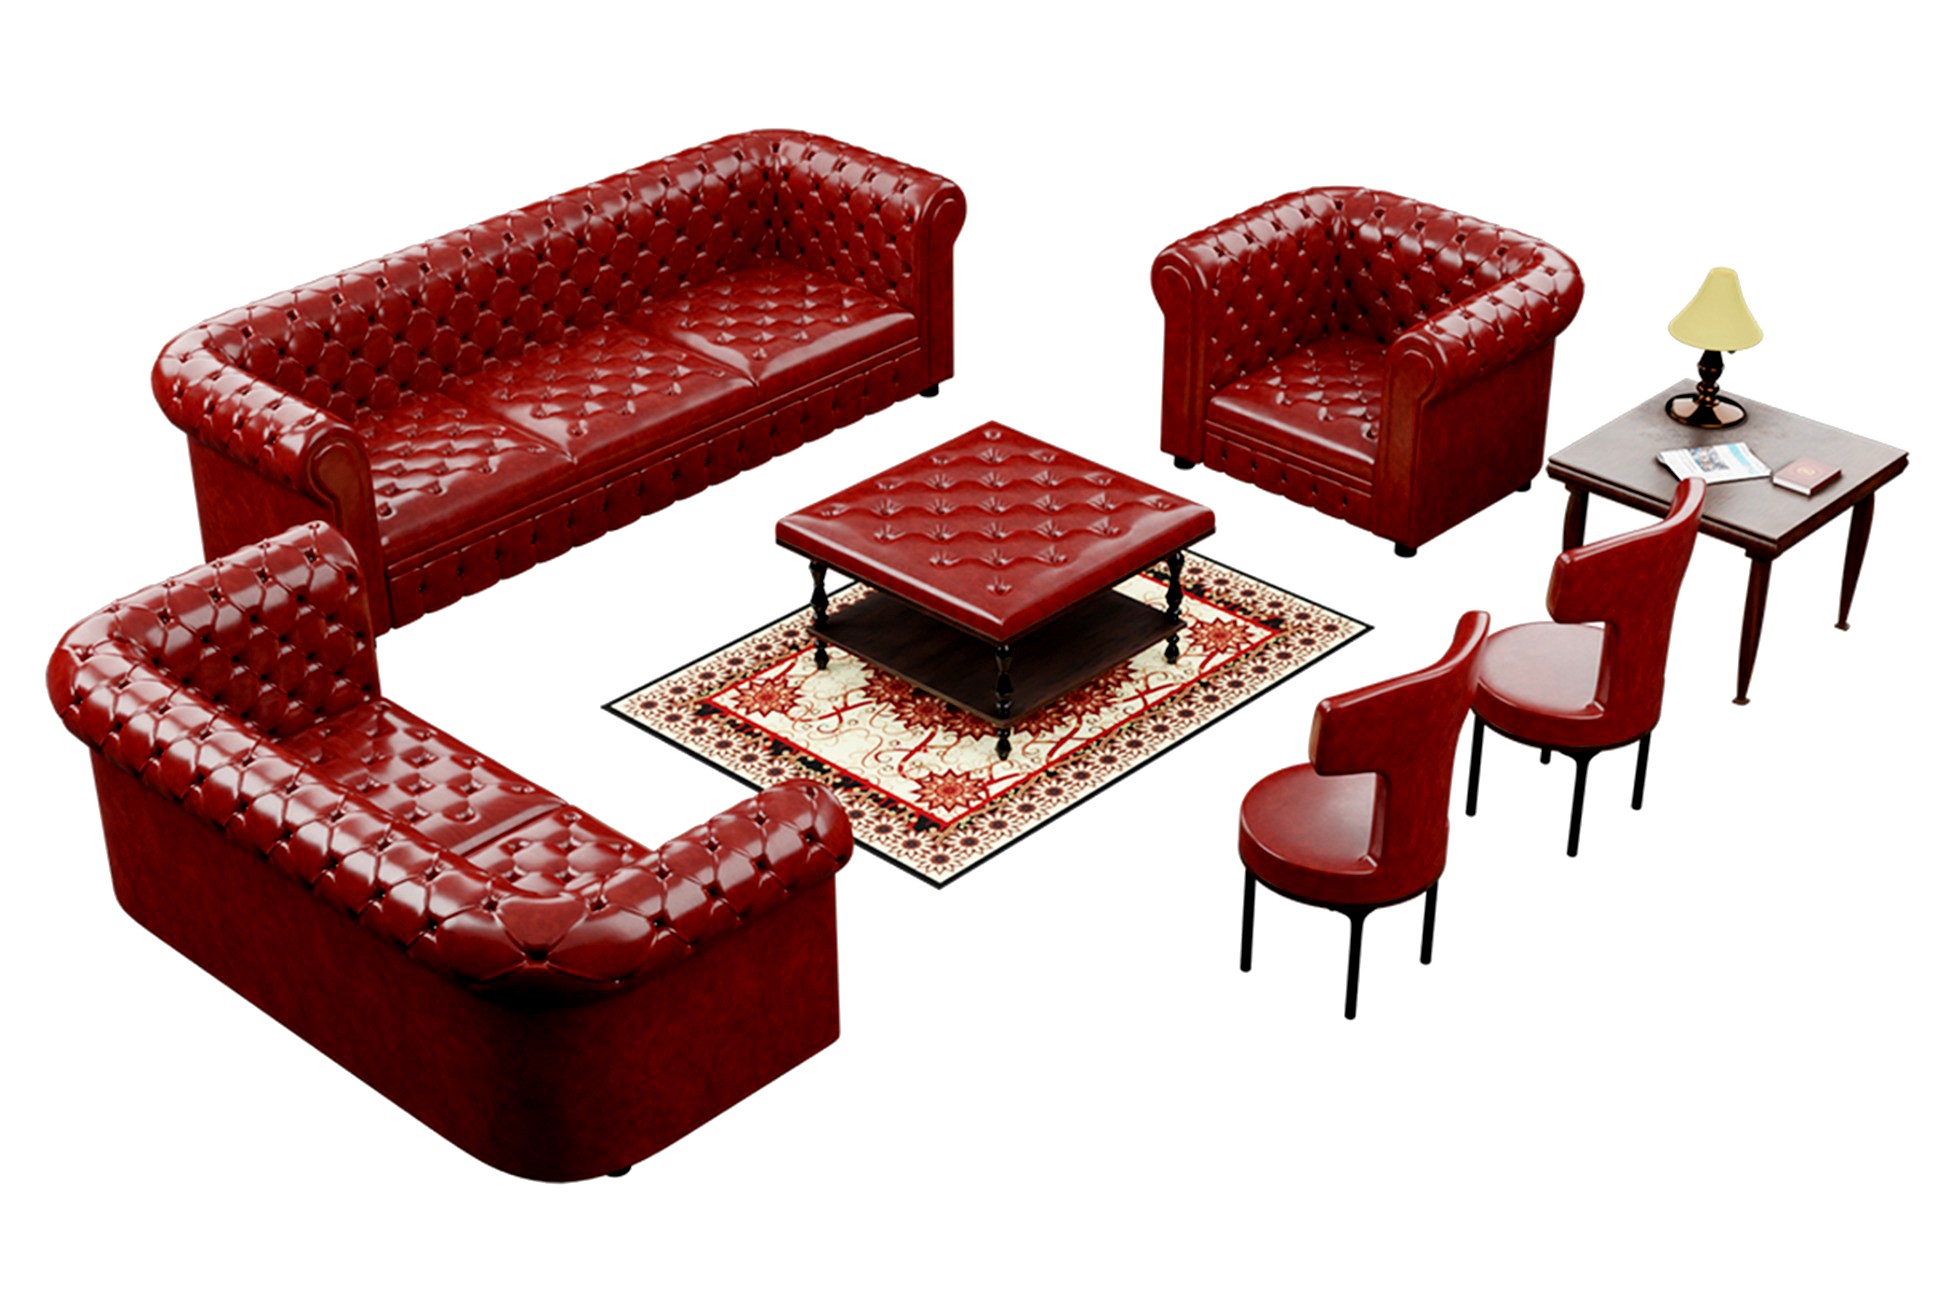 Furniture 3D Models - Realistic Red Leather Sofa Set